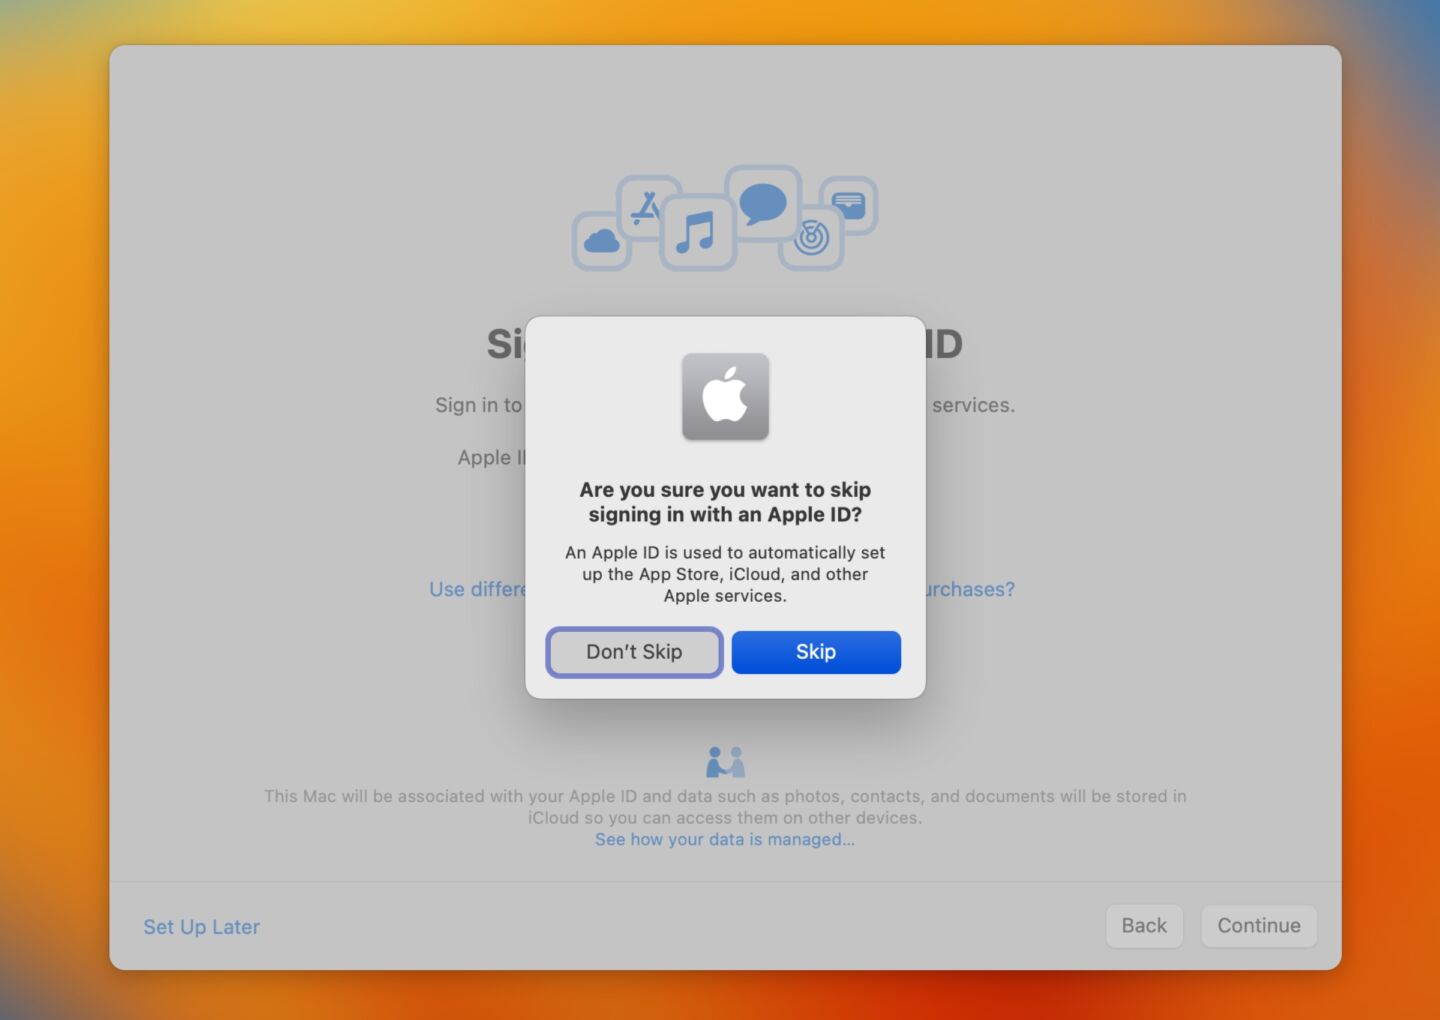 macos-sign-in-1440x1020.jpeg